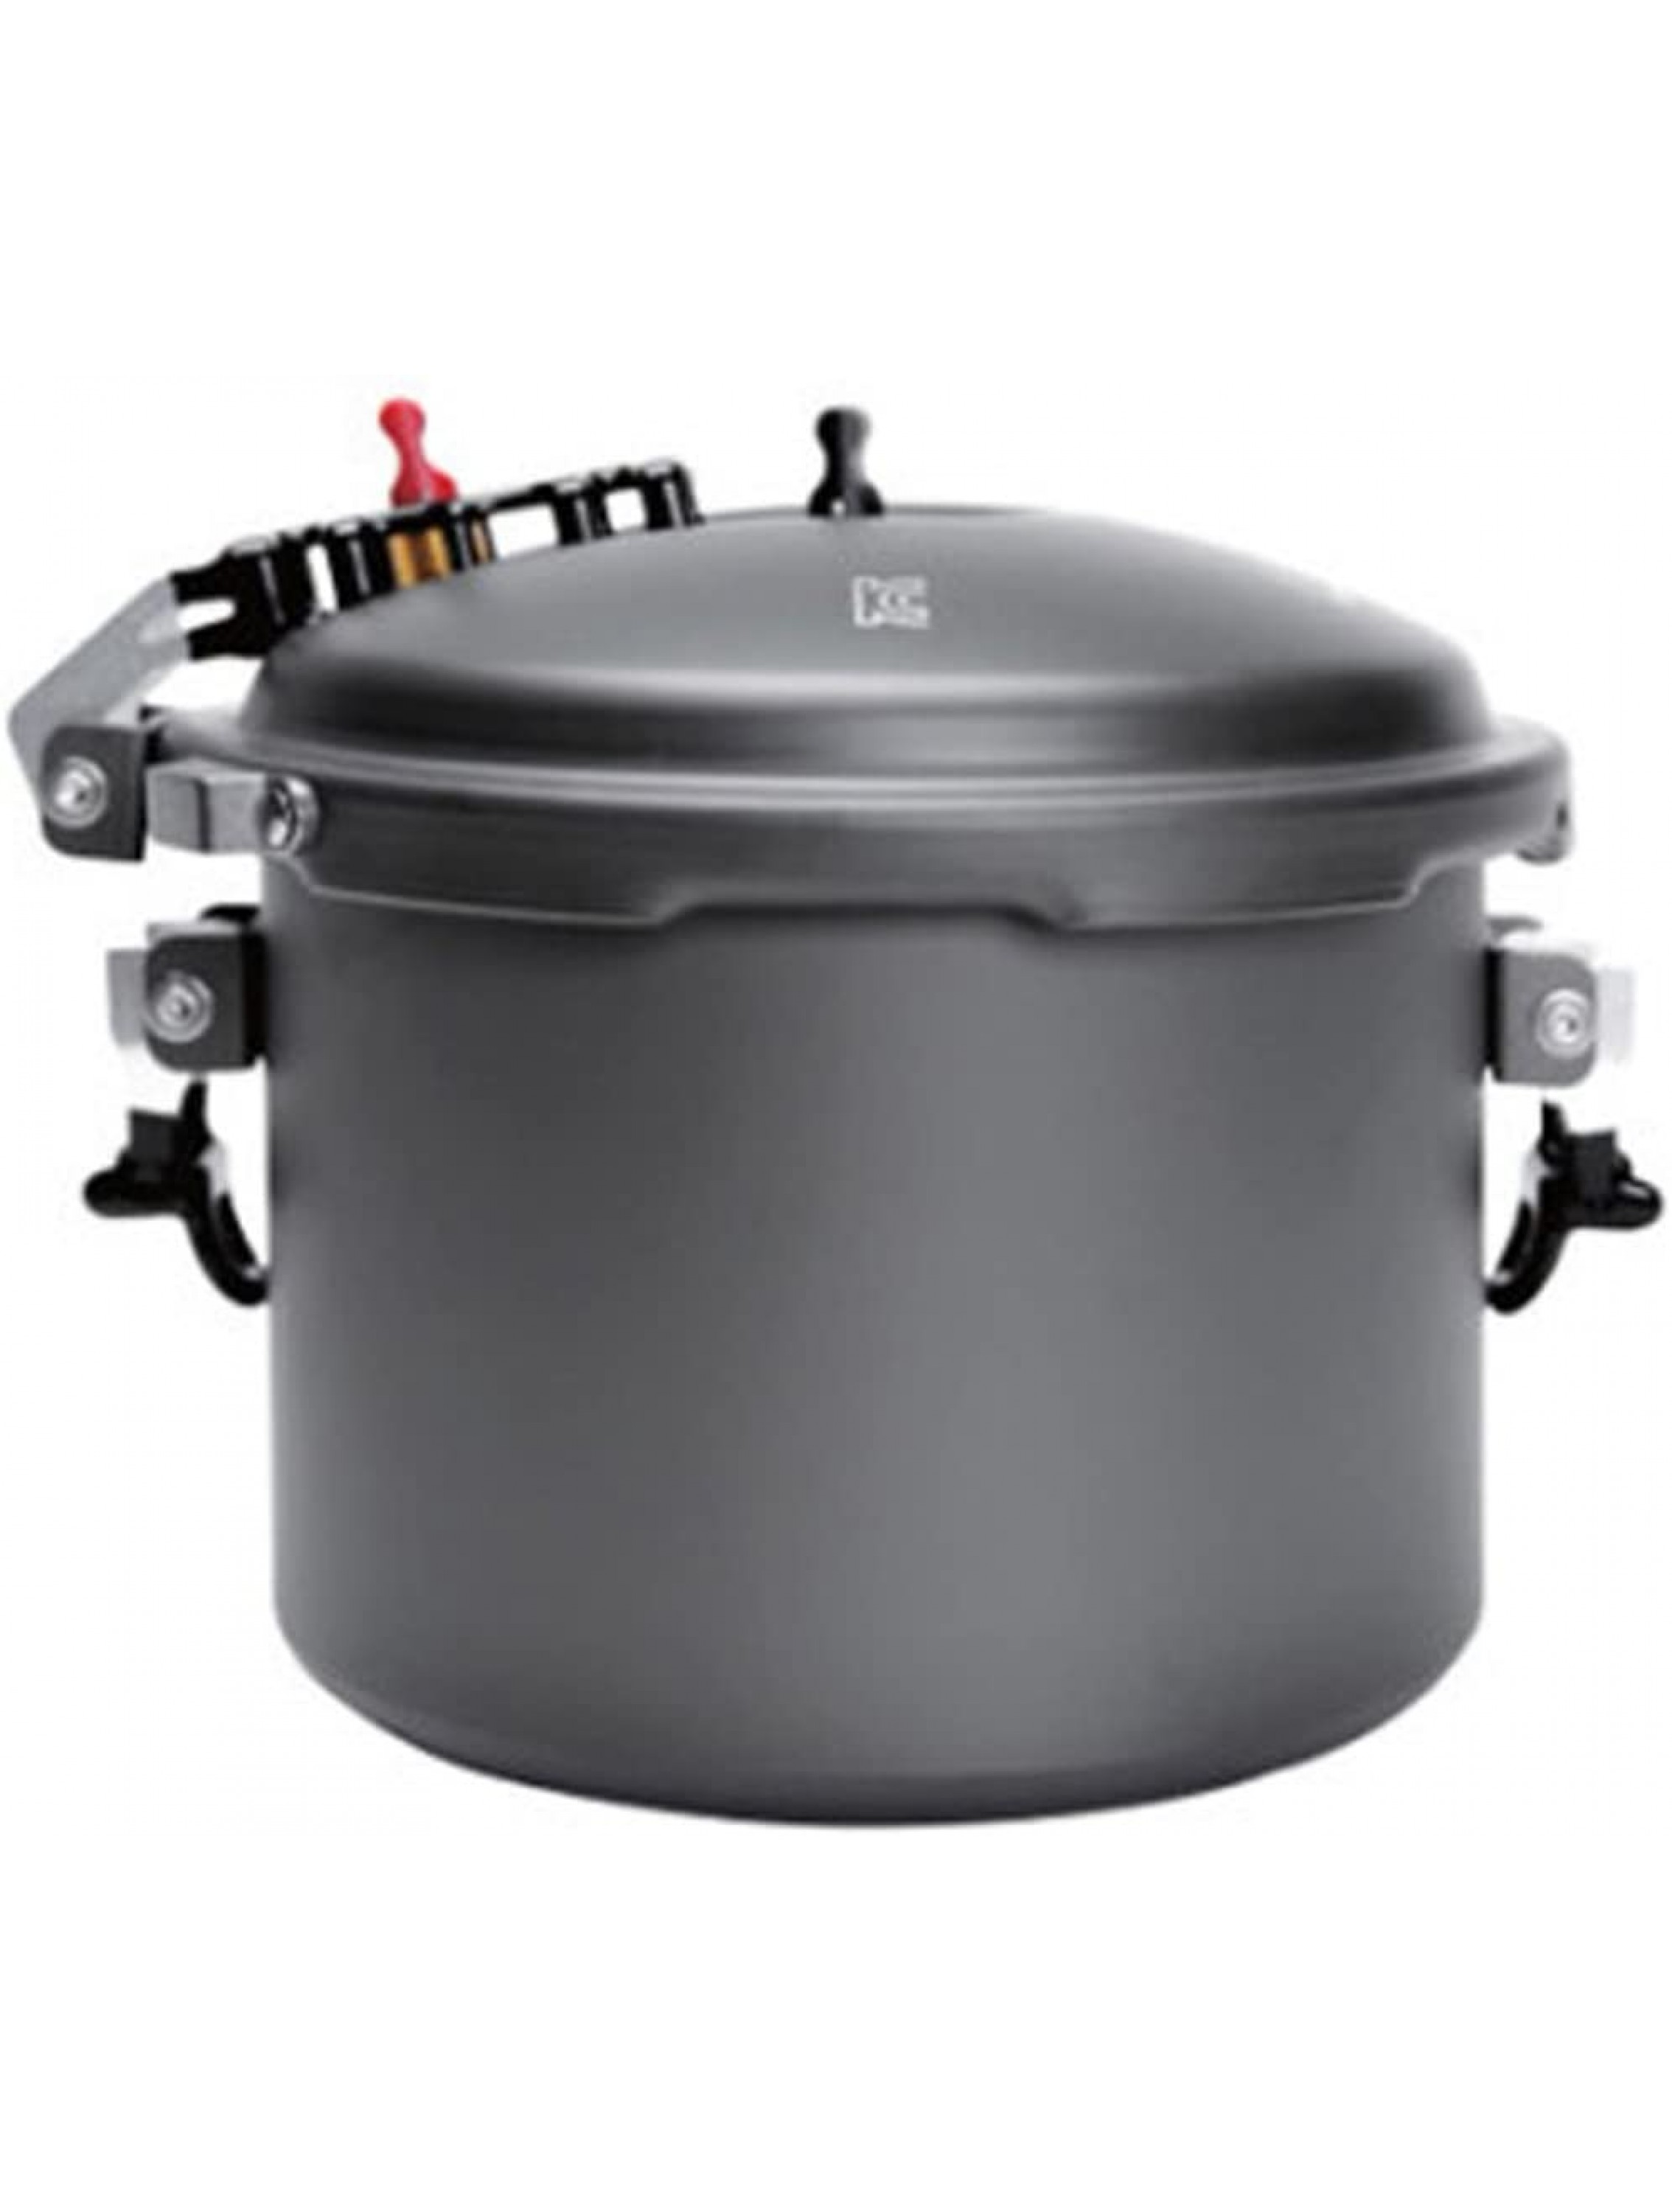 Snowline Camping Outdoor Pressure Cooker Portable Rice Cooker 2.4L 2-3 People - B4EM2FFKE